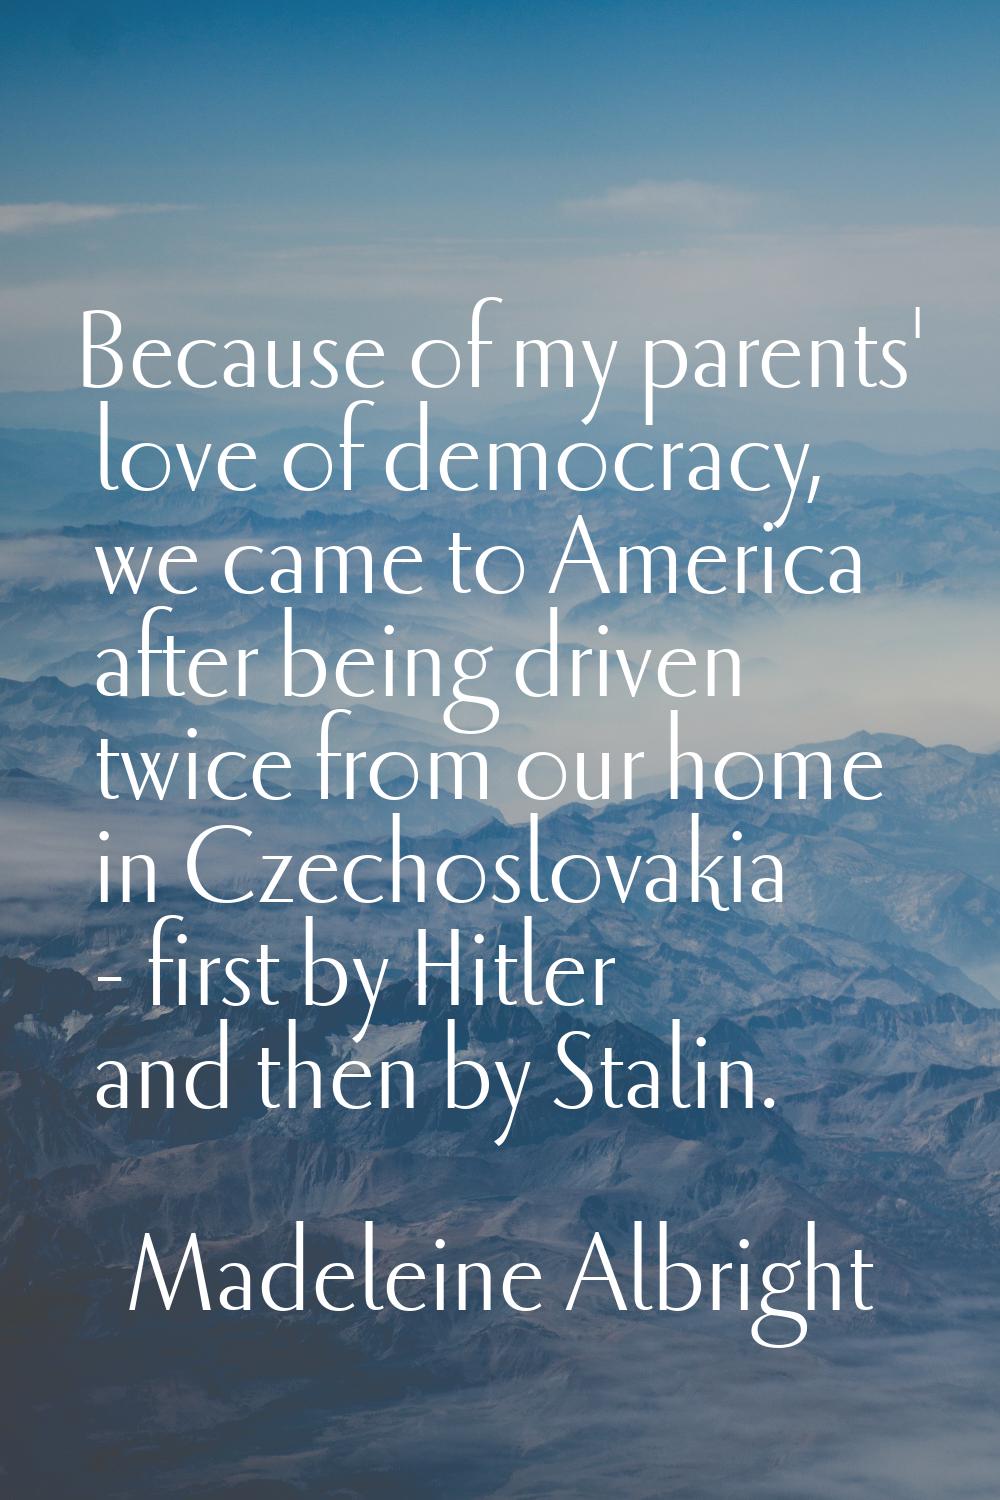 Because of my parents' love of democracy, we came to America after being driven twice from our home